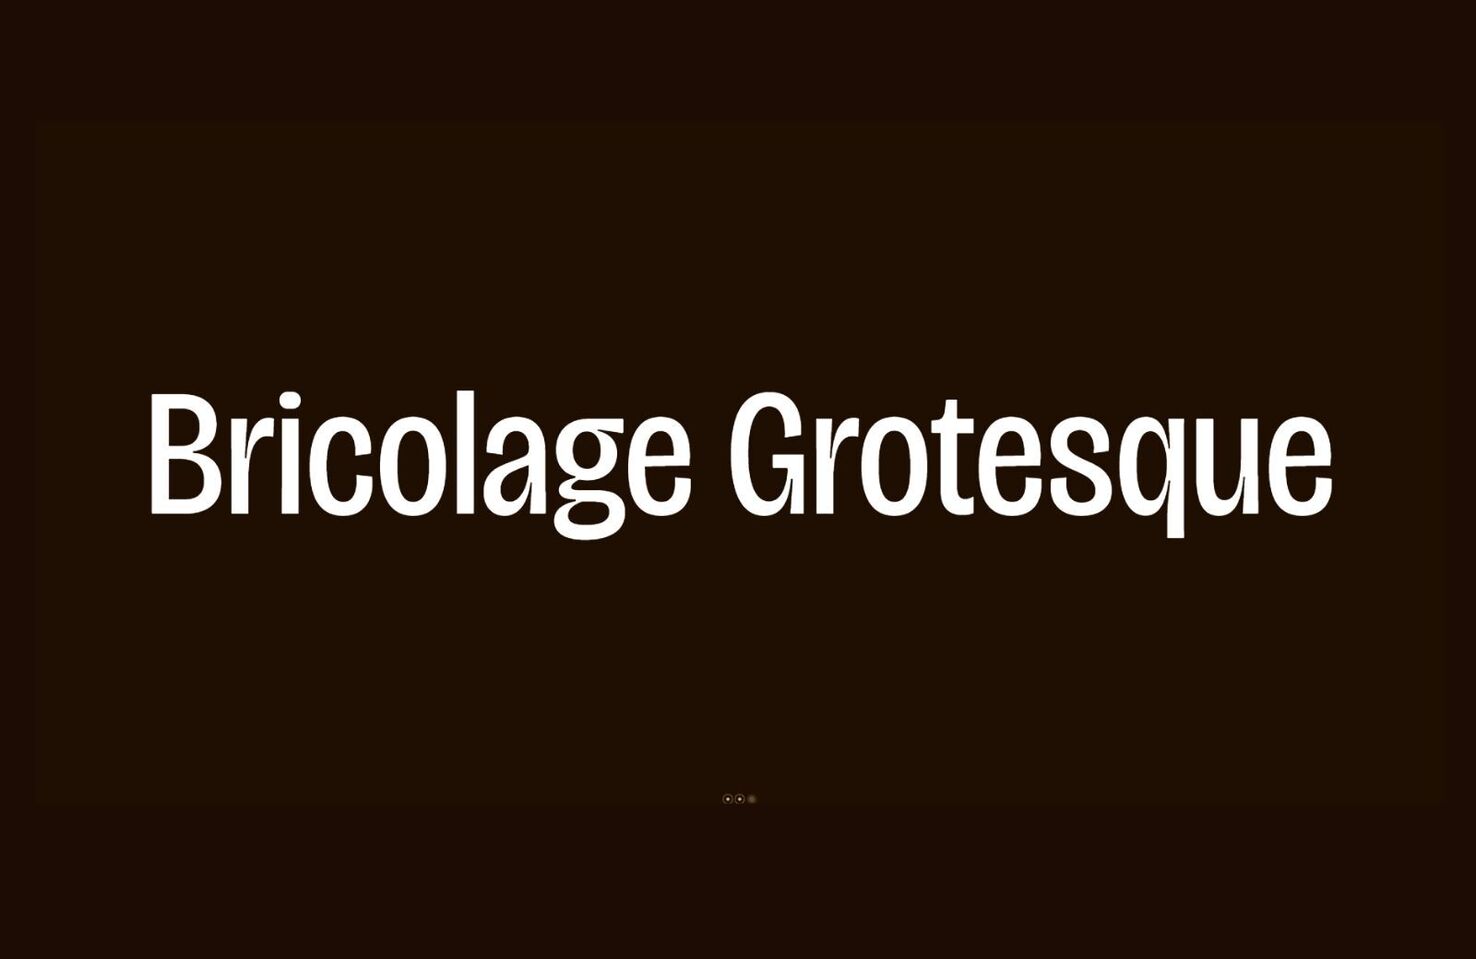 Bricolage Grotesque Condensed ExtraBold Font preview